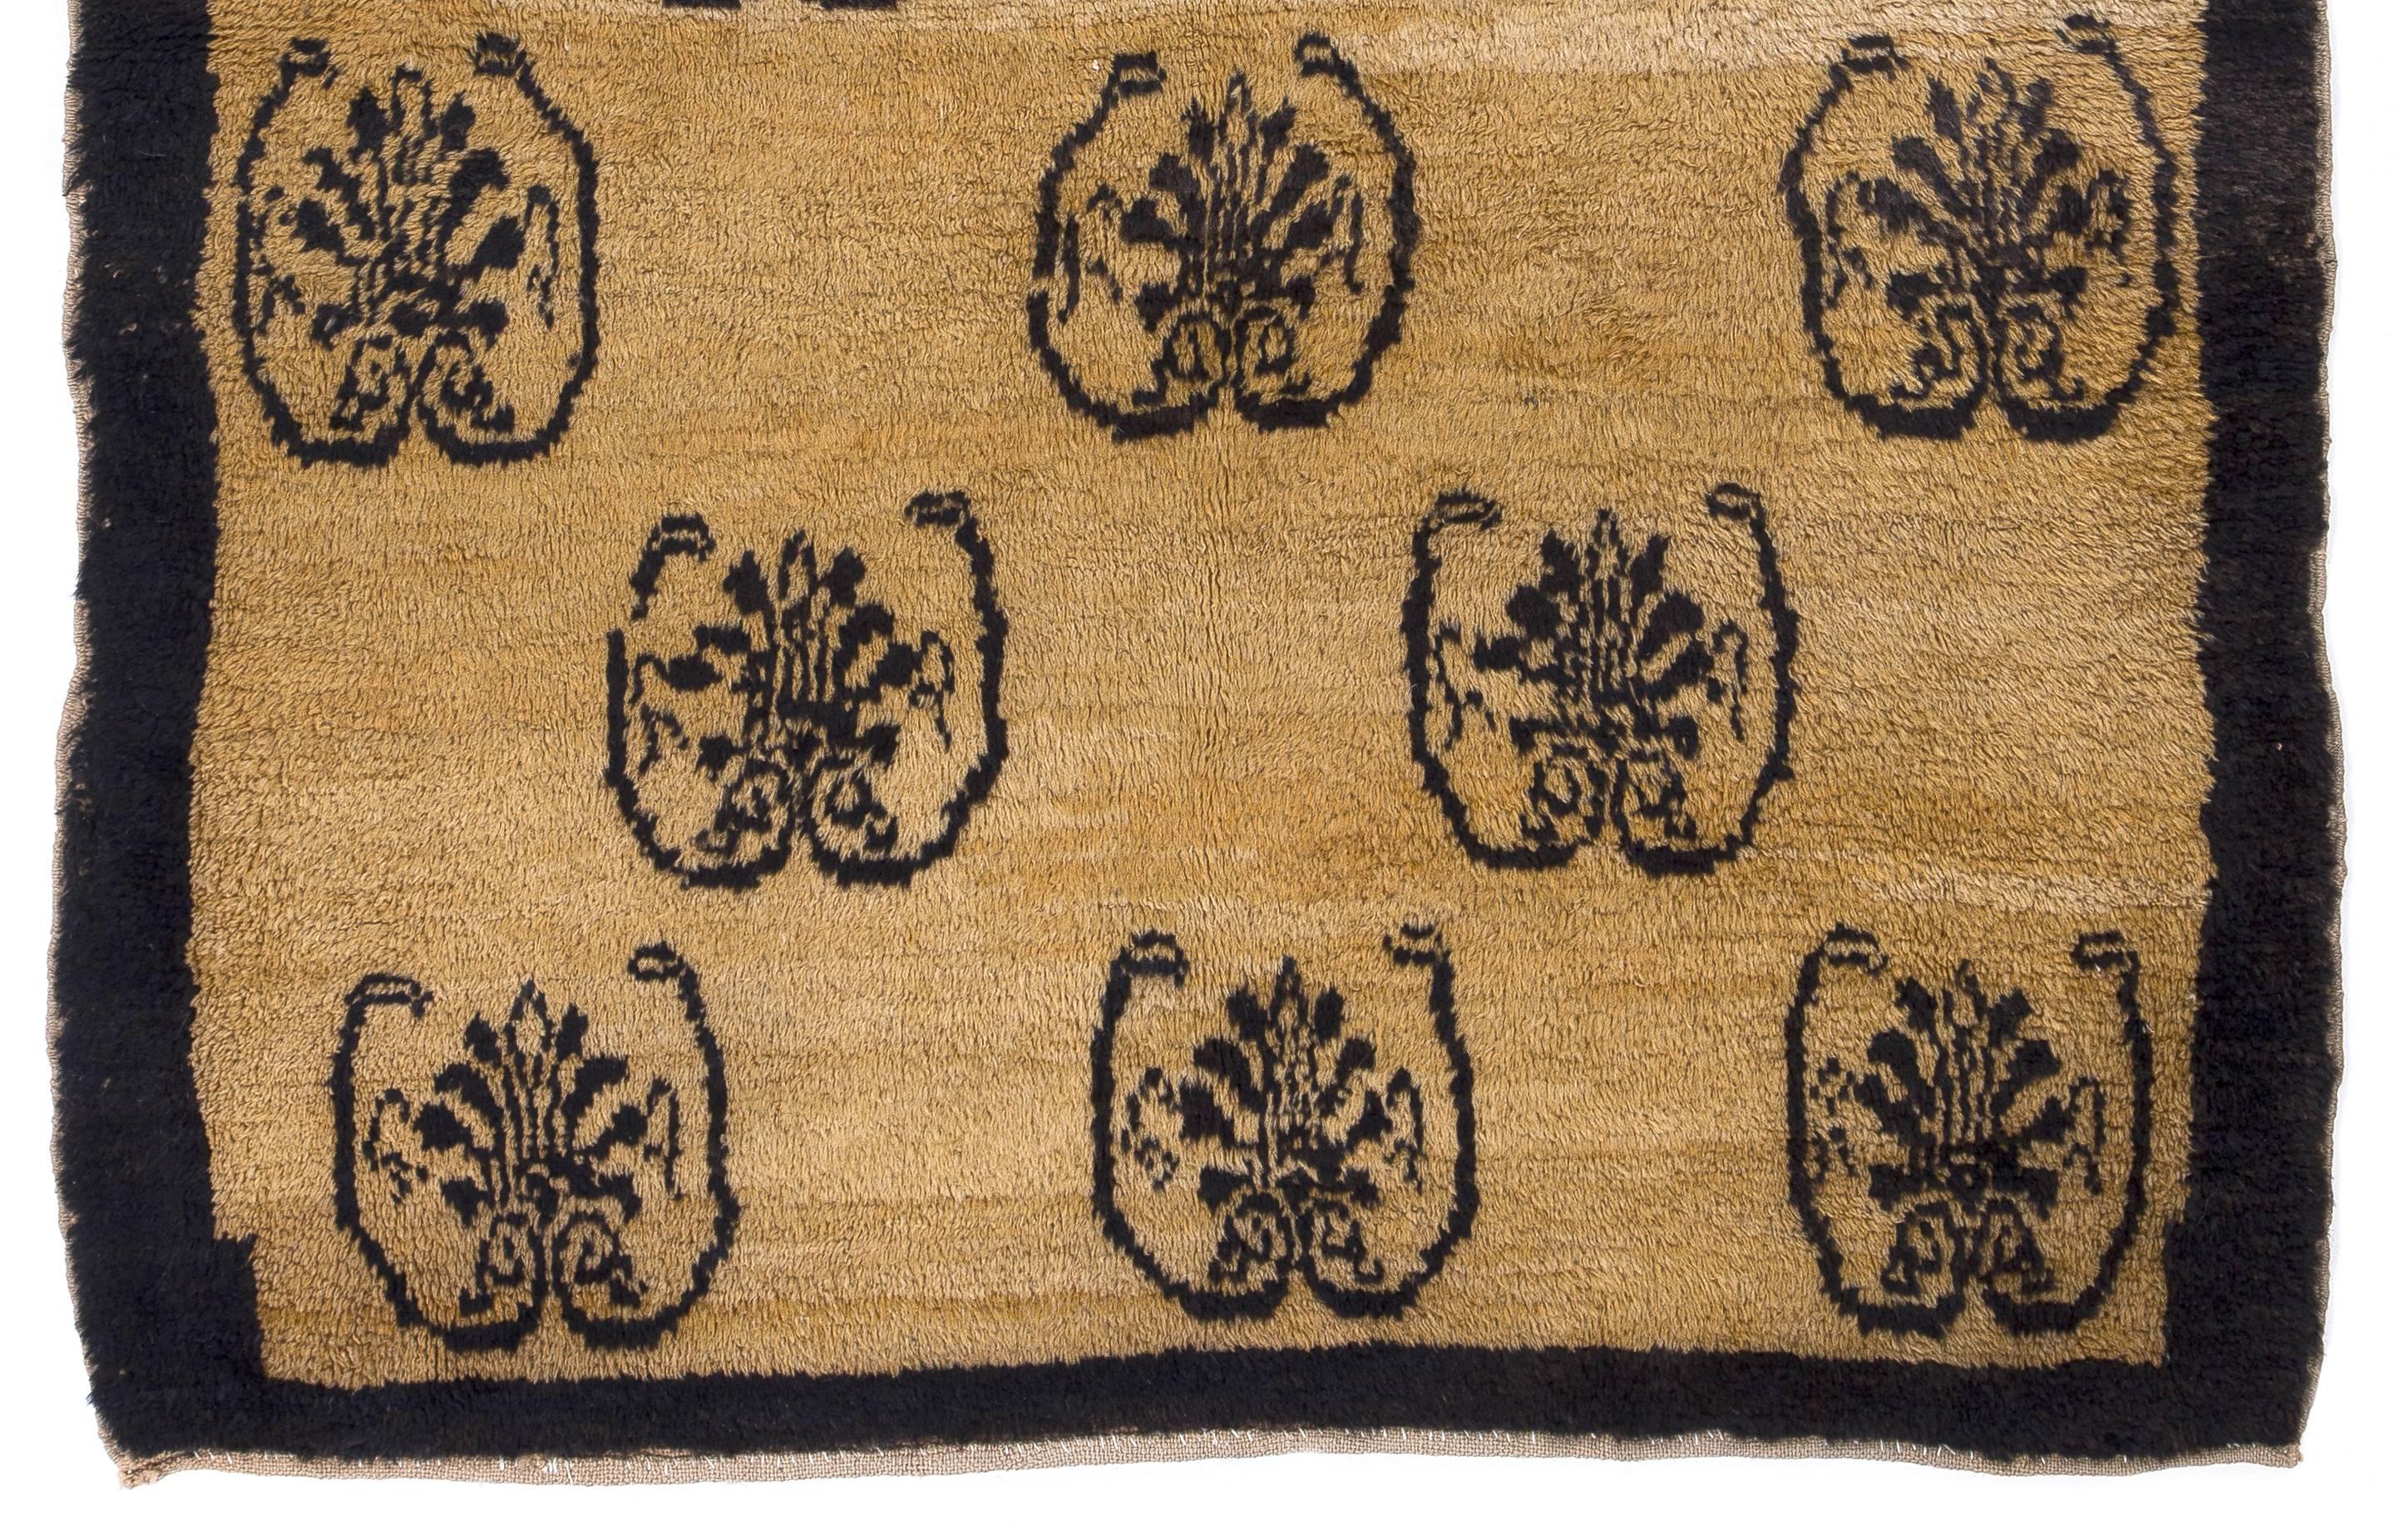 A unique central Anatolian rug from the village of Karapinar. Fascinating tribal design on a beautiful natural undyed camel ground framed with a dull navy blue border. The rug is made of sheep and camel wool blended with lustrous velvety angora